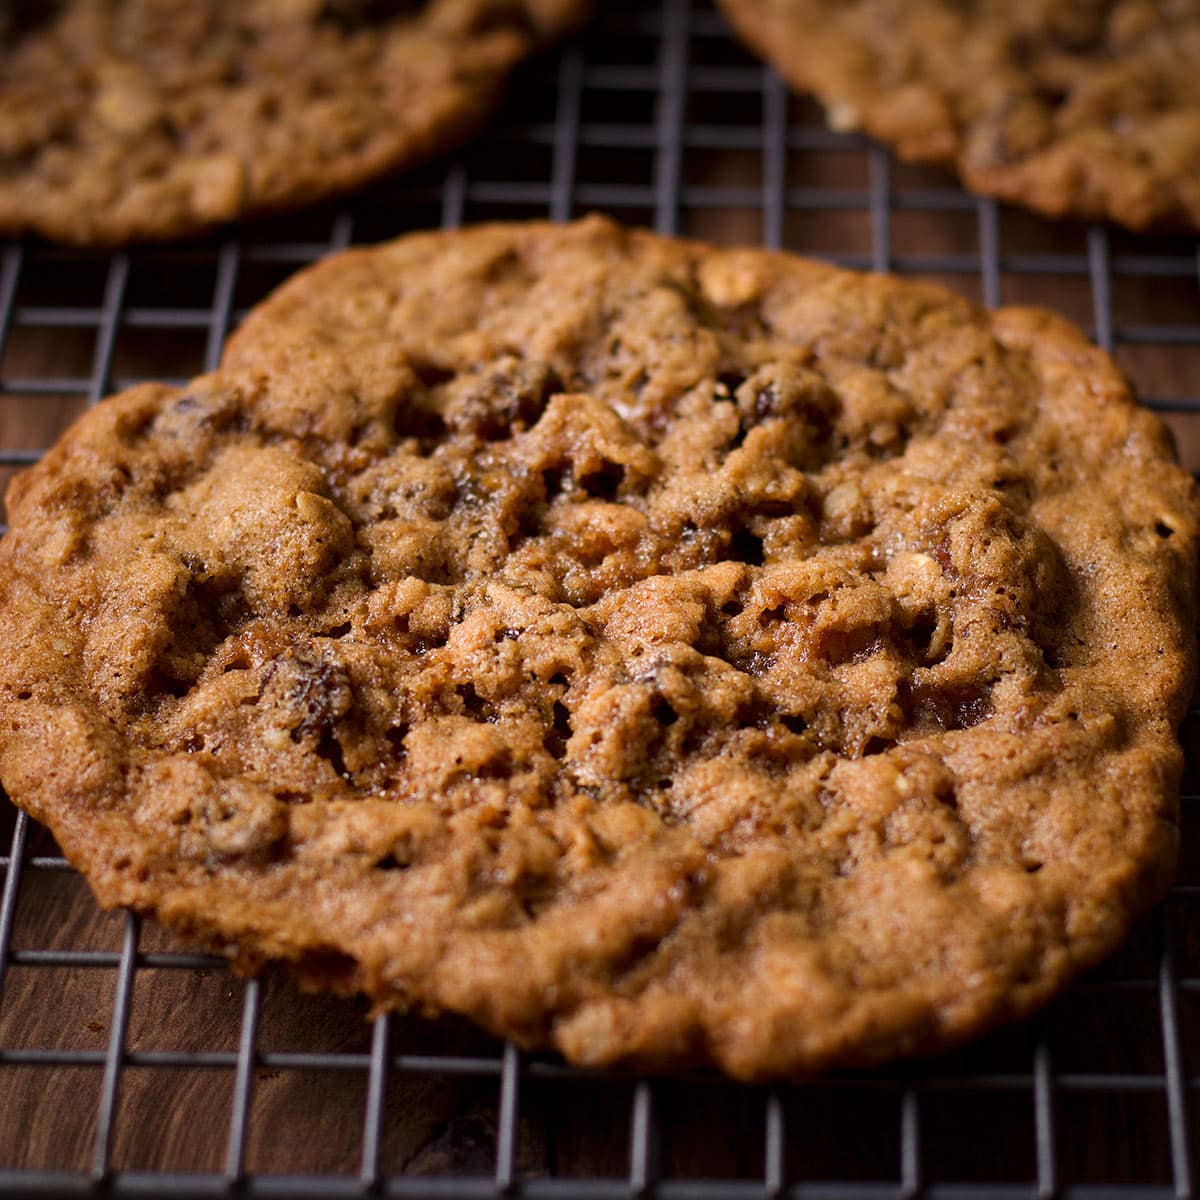 Thin and chewy oatmeal raisin cookies cooling on a wire rack.